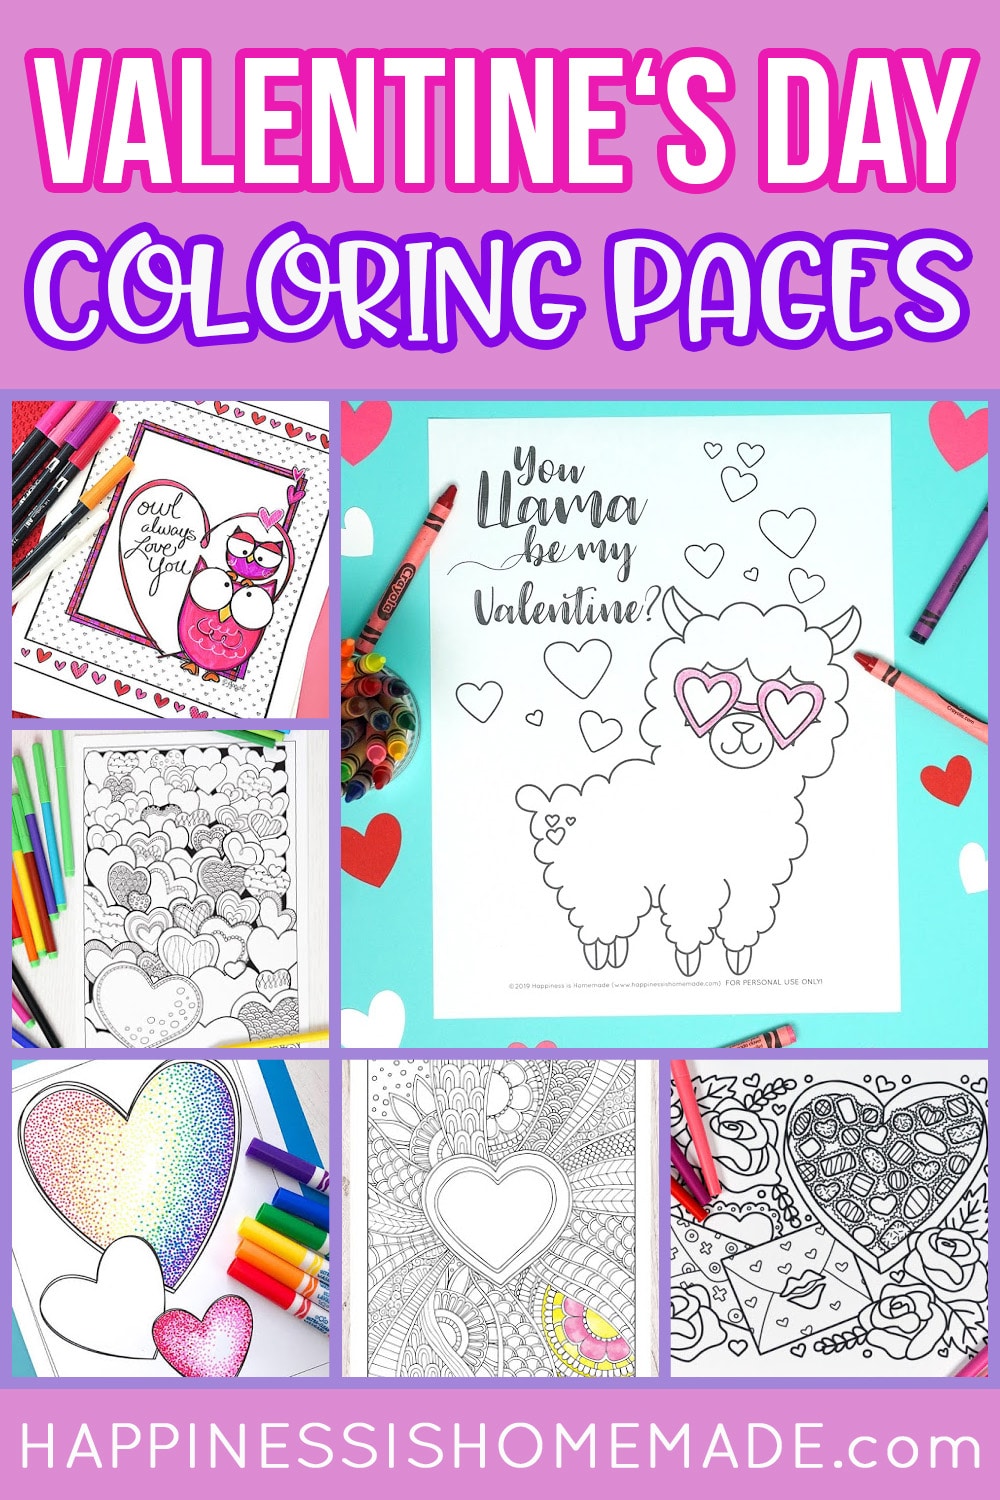 https://www.happinessishomemade.net/wp-content/uploads/2021/01/Free-Printable-Valentines-Day-Coloring-Pages-for-All-Ages.jpg